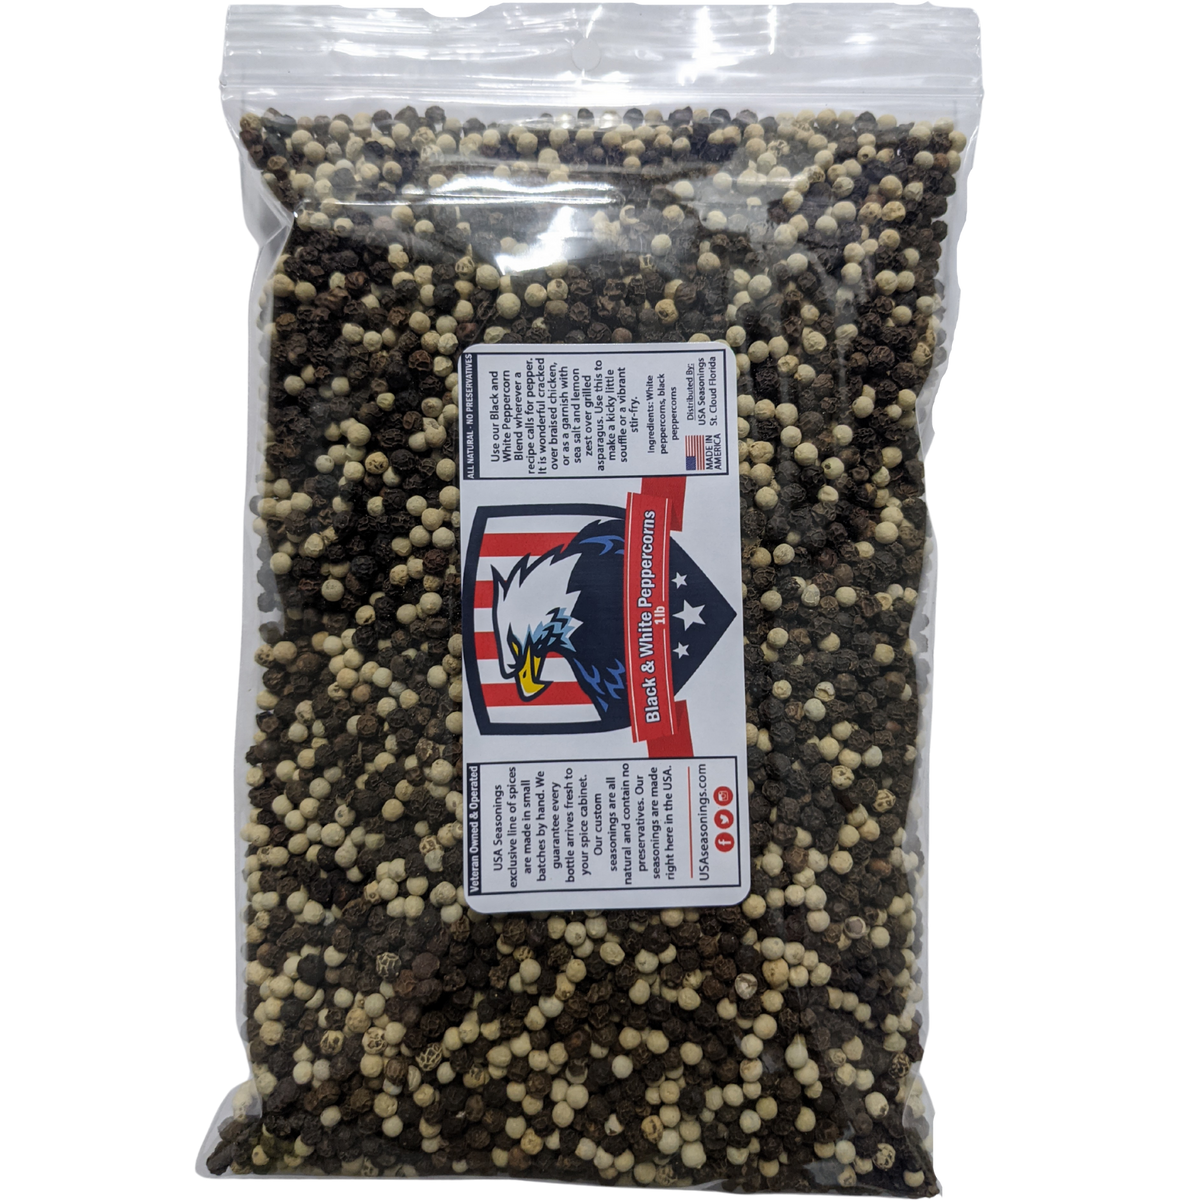 Where Does Black Pepper Come From? What is Black Peppercorn?